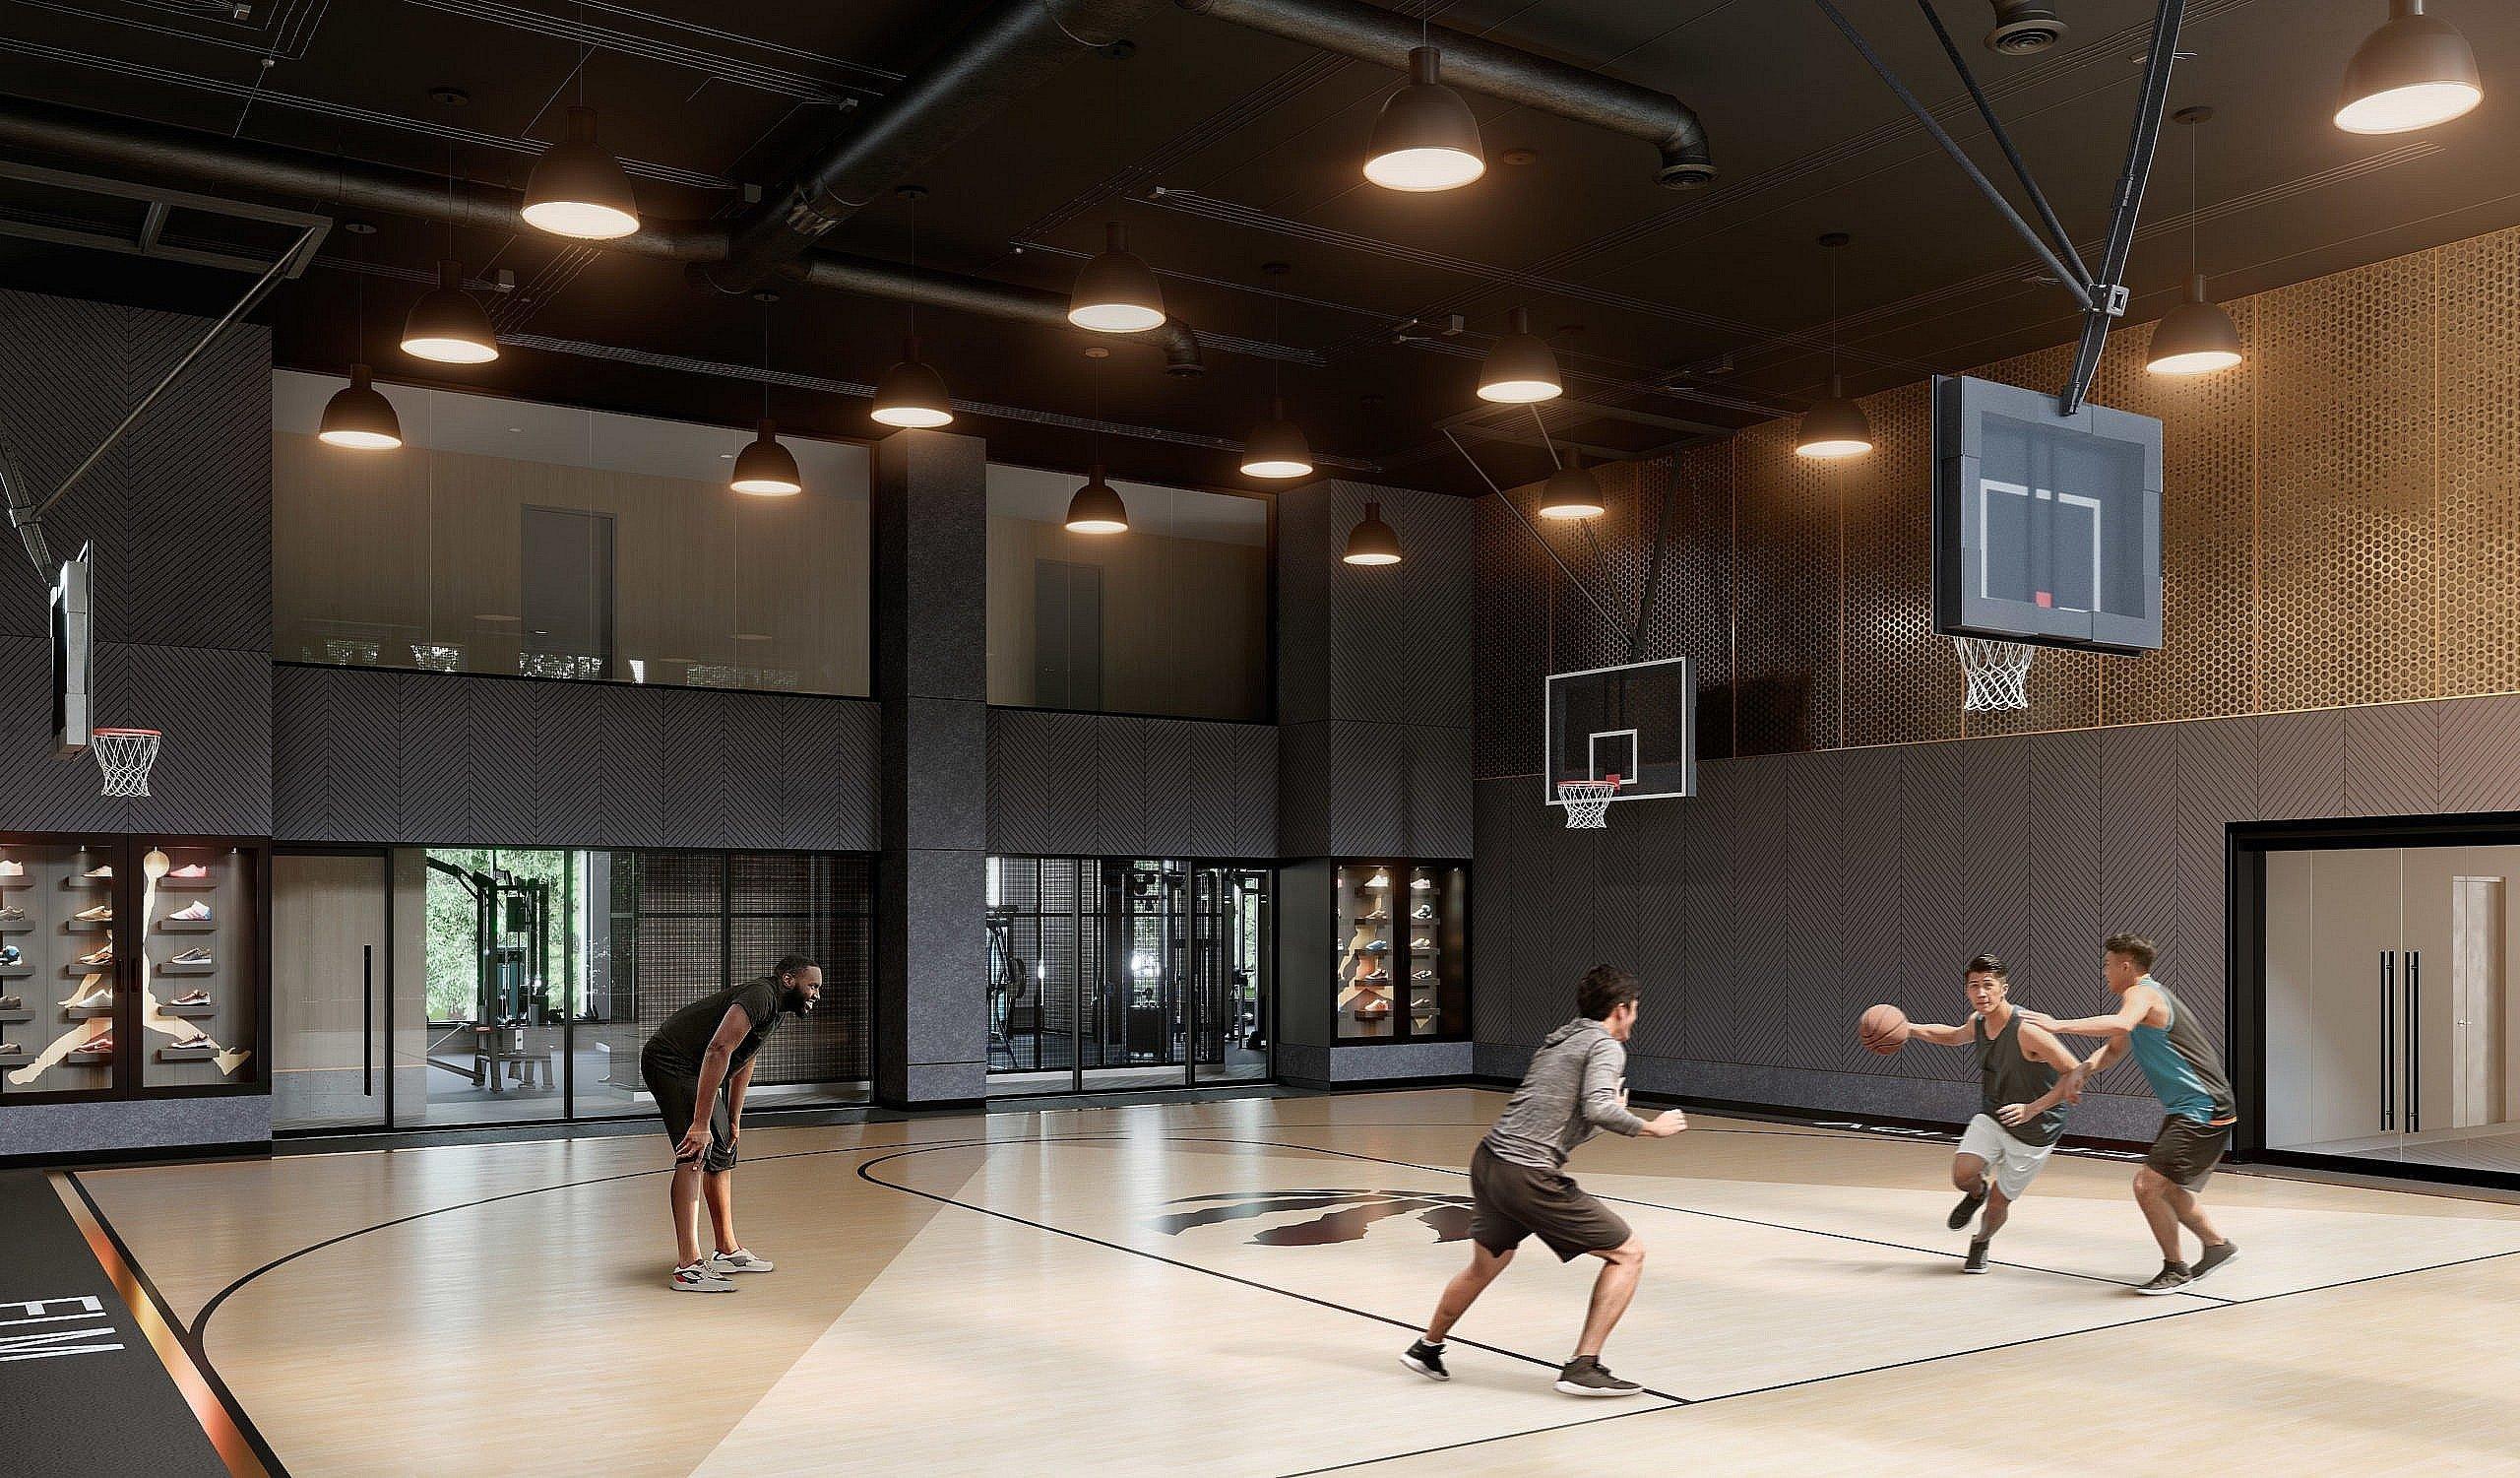 The double-height professional Raptors basketball court at Elm and Ledbury. Ideally located near the intersection of Queen & Church in Toronto's prestigious Garden District, Elm and Ledbury is Fitzroviaâs latest flagship rental community.